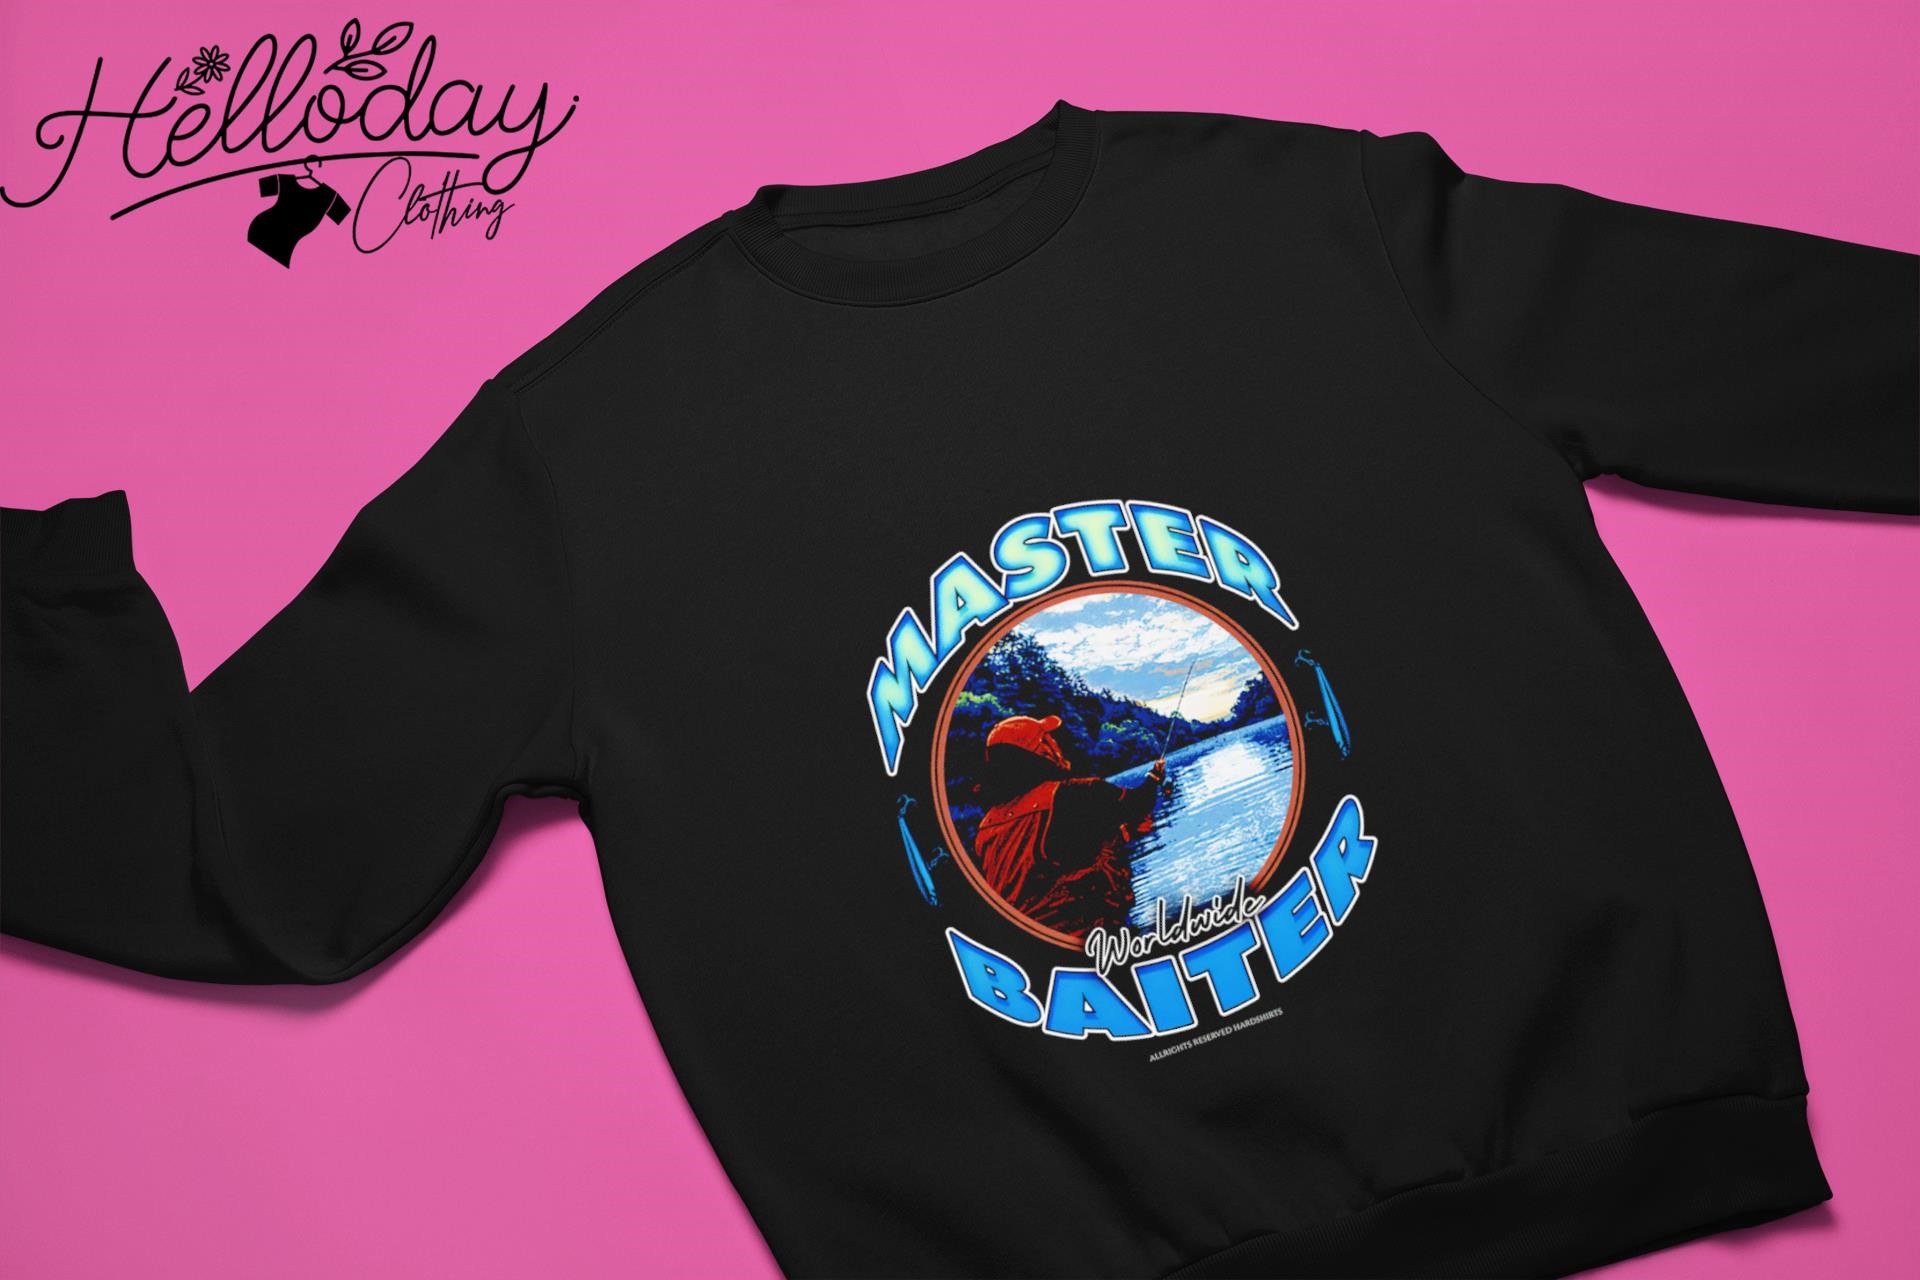 Official master Baiter T-Shirt, hoodie, sweater, long sleeve and